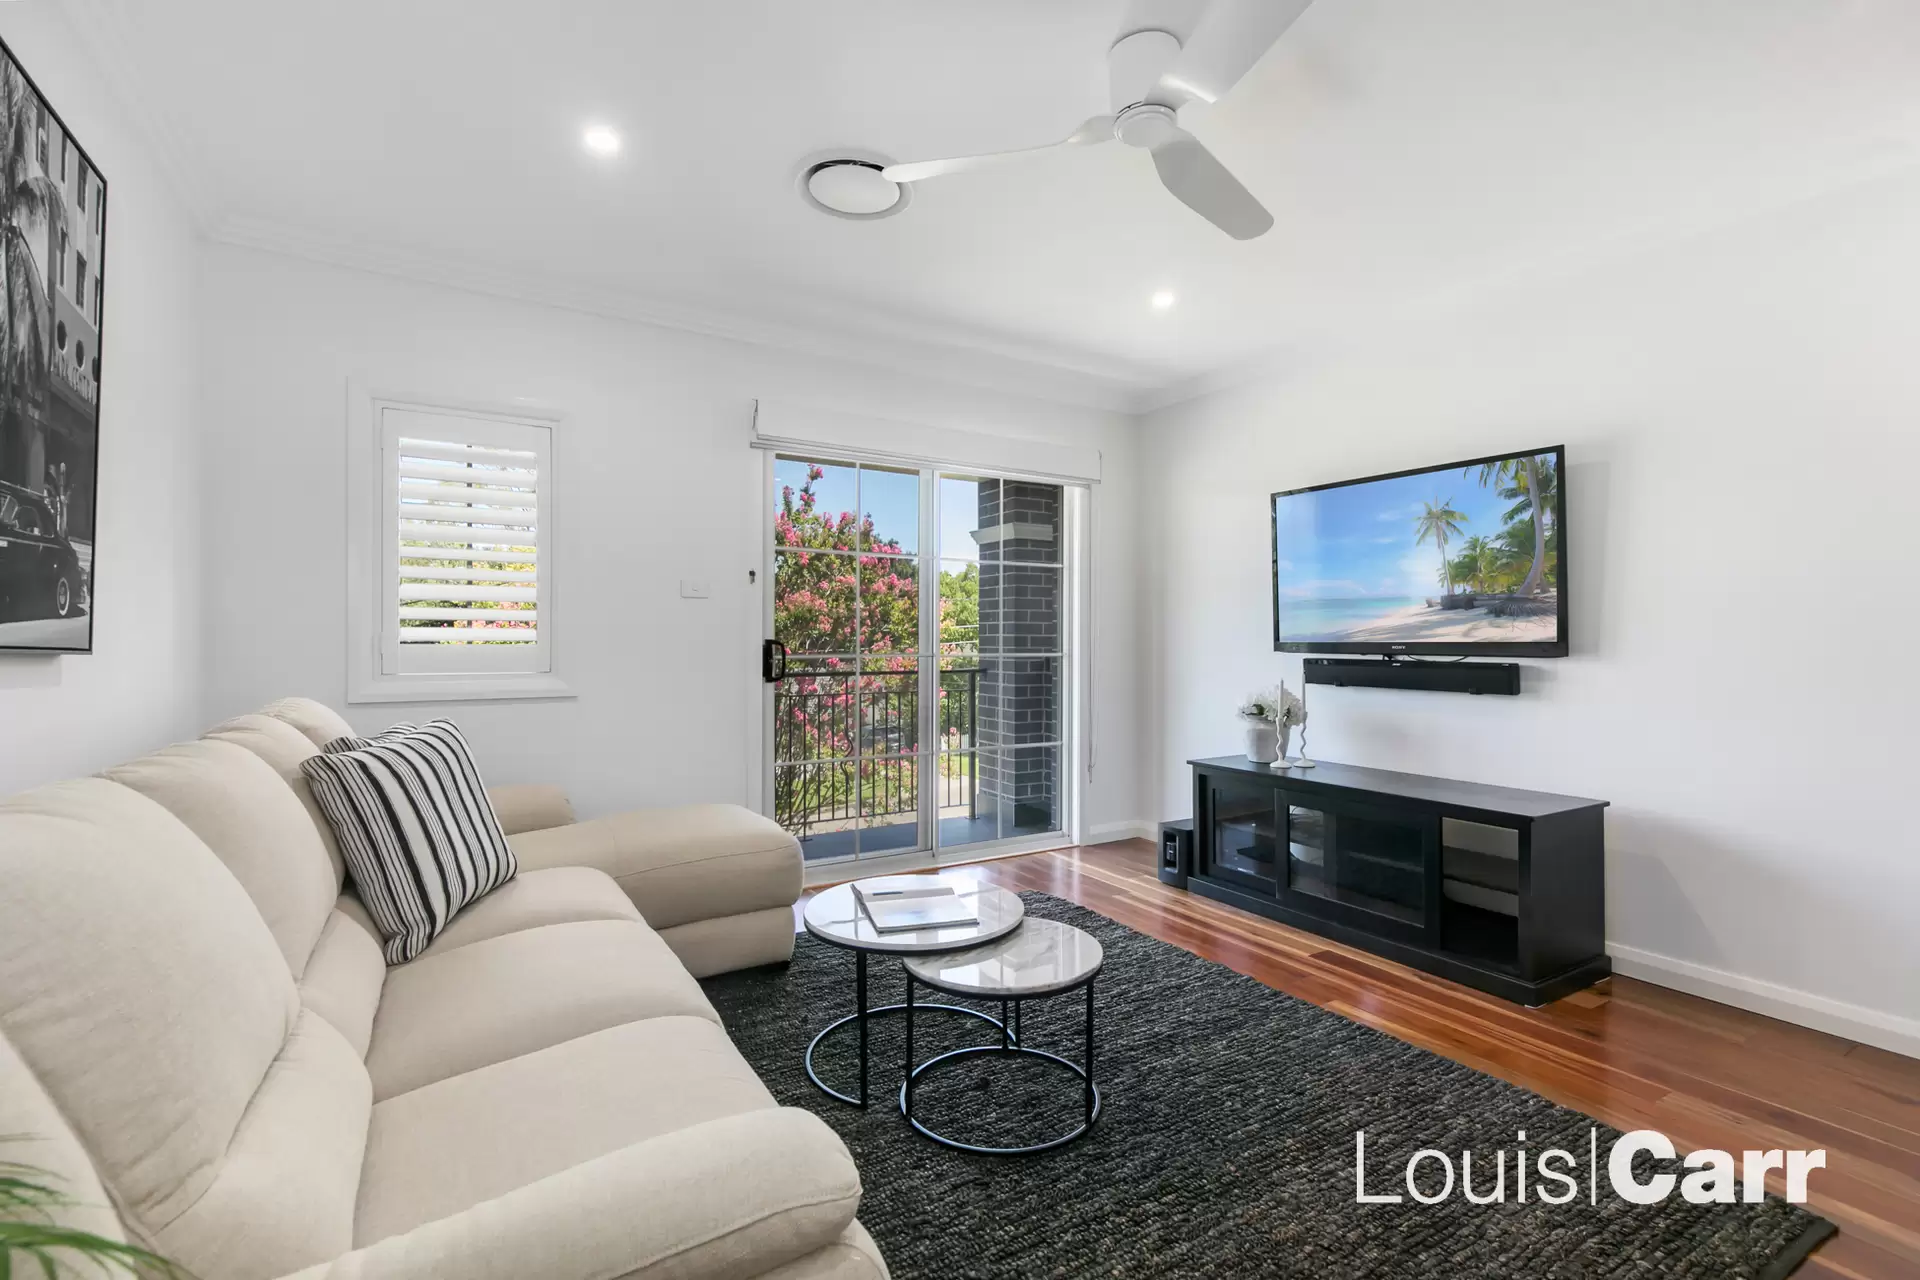 Photo #6: 15 Wesson Road, West Pennant Hills - For Sale by Louis Carr Real Estate